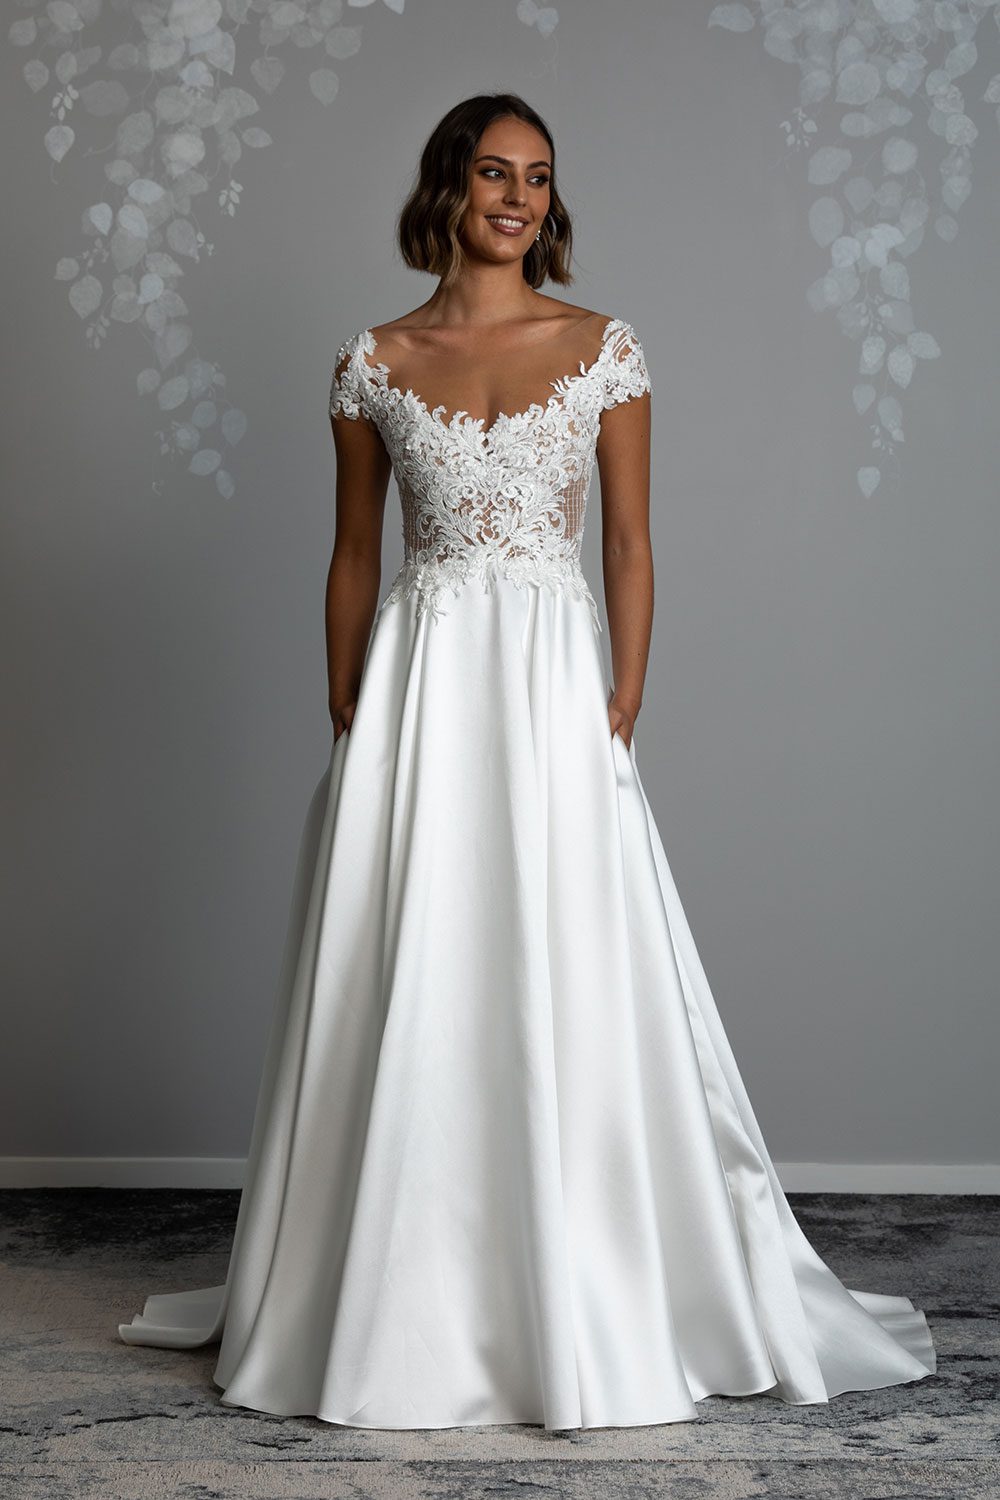 Leona Wedding Dress from Vinka Design. This gorgeous gown is hand appliqued with two complimentary laces on a nude tulle base, which creates a striking effect. Delicate cap sleeves flatter the arms whilst also drawing the eye to the slenderness of the waist. It has a low back edged with lace that cinches in the waist and is carefully styled to delicately finish into the dramatic skirt. Full length view of model wearing with intricate lace bodice and cap sleeves with silk skirt that cinches at the waist and long sillk skirt with folds and pockets